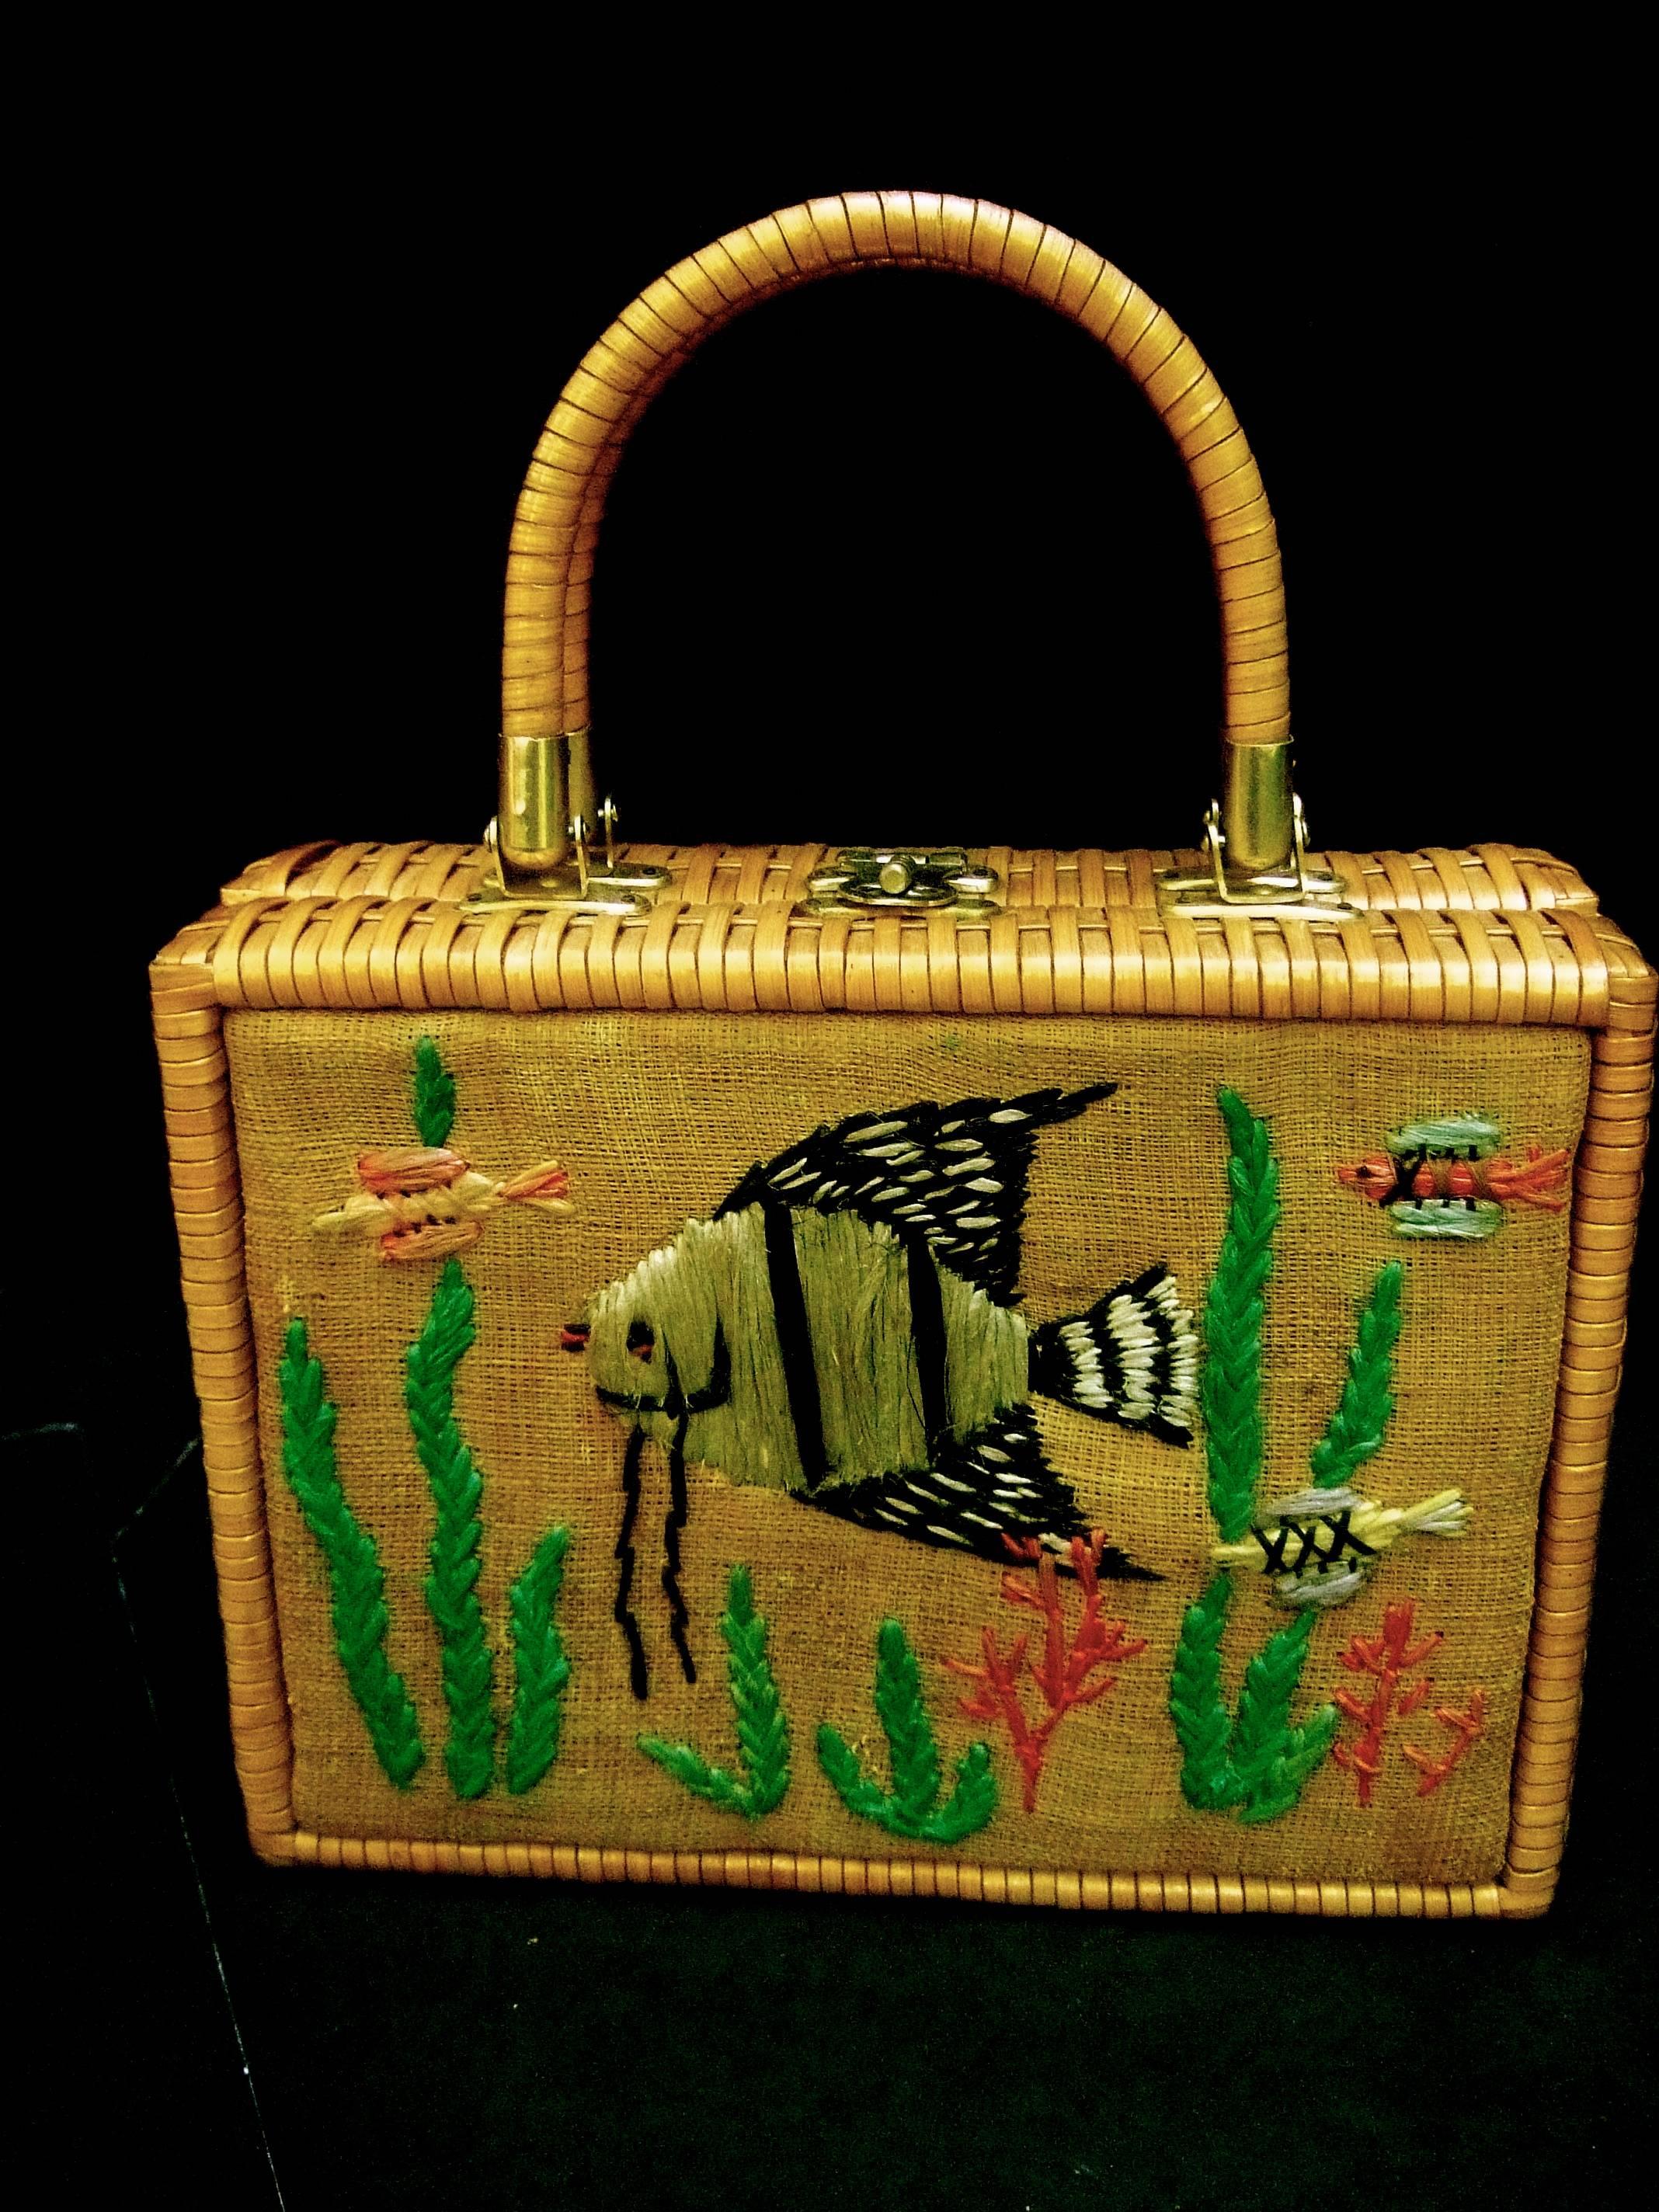 Whimsical wicker straw embroidered sea life handbag ca 1960
The woven wicker retro handbag is designed with a burlap 
front panel. Embroidered with schools of fish, seaweed 
and coral branches 

The twins handles, sides and back exterior are